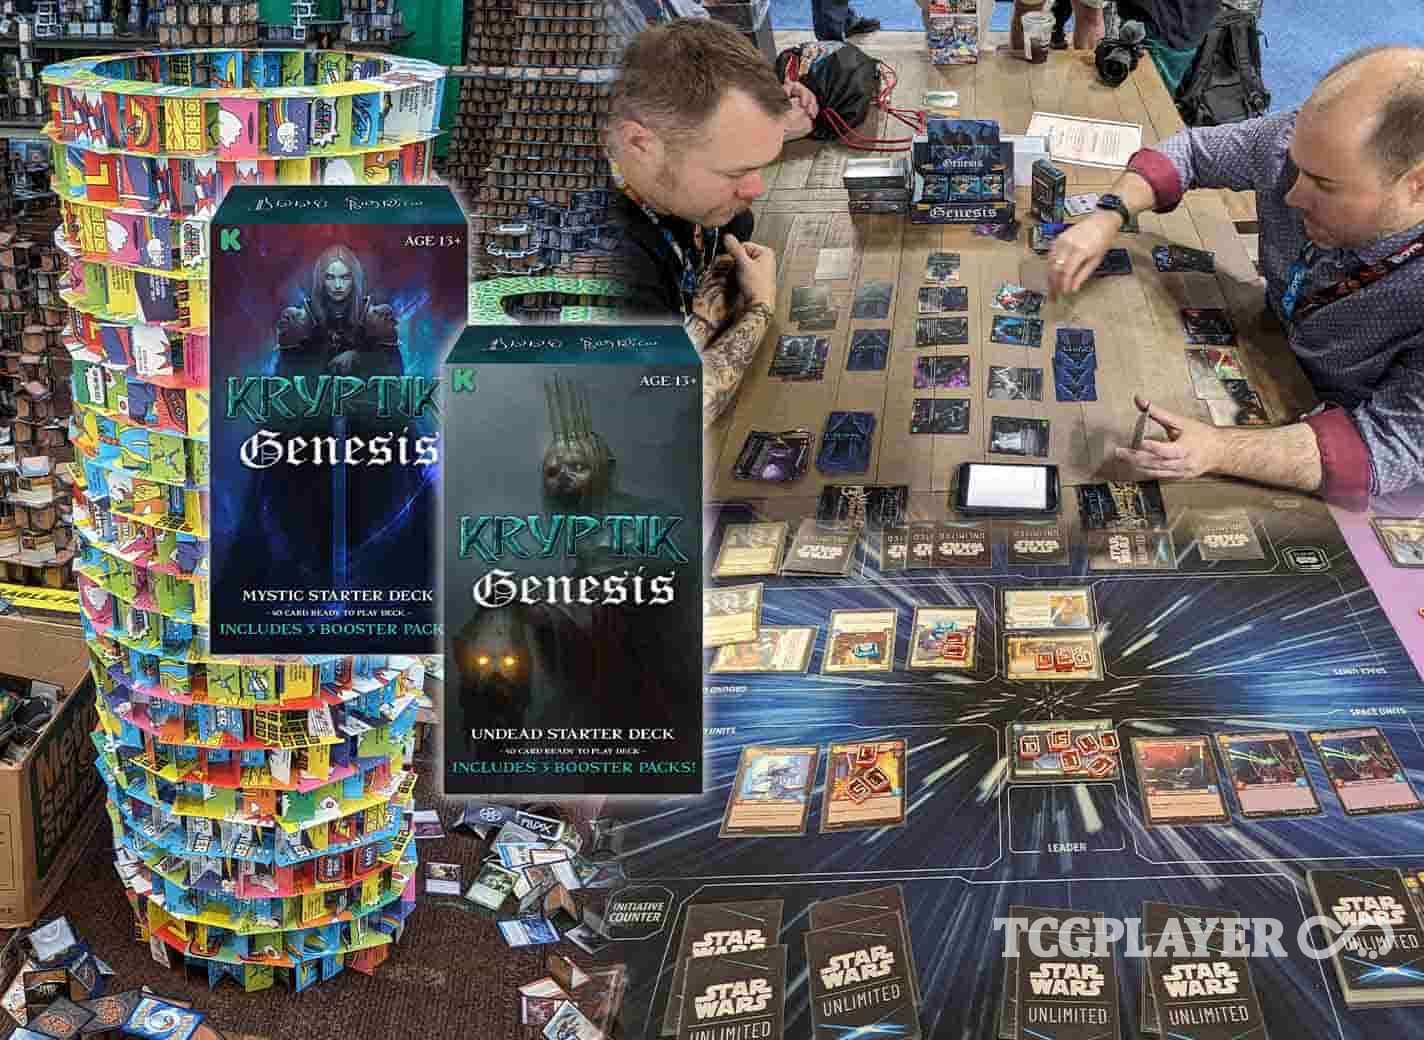 Star Wars: Unlimited TCG felt quick and punchy in our Gen Con preview -  Polygon